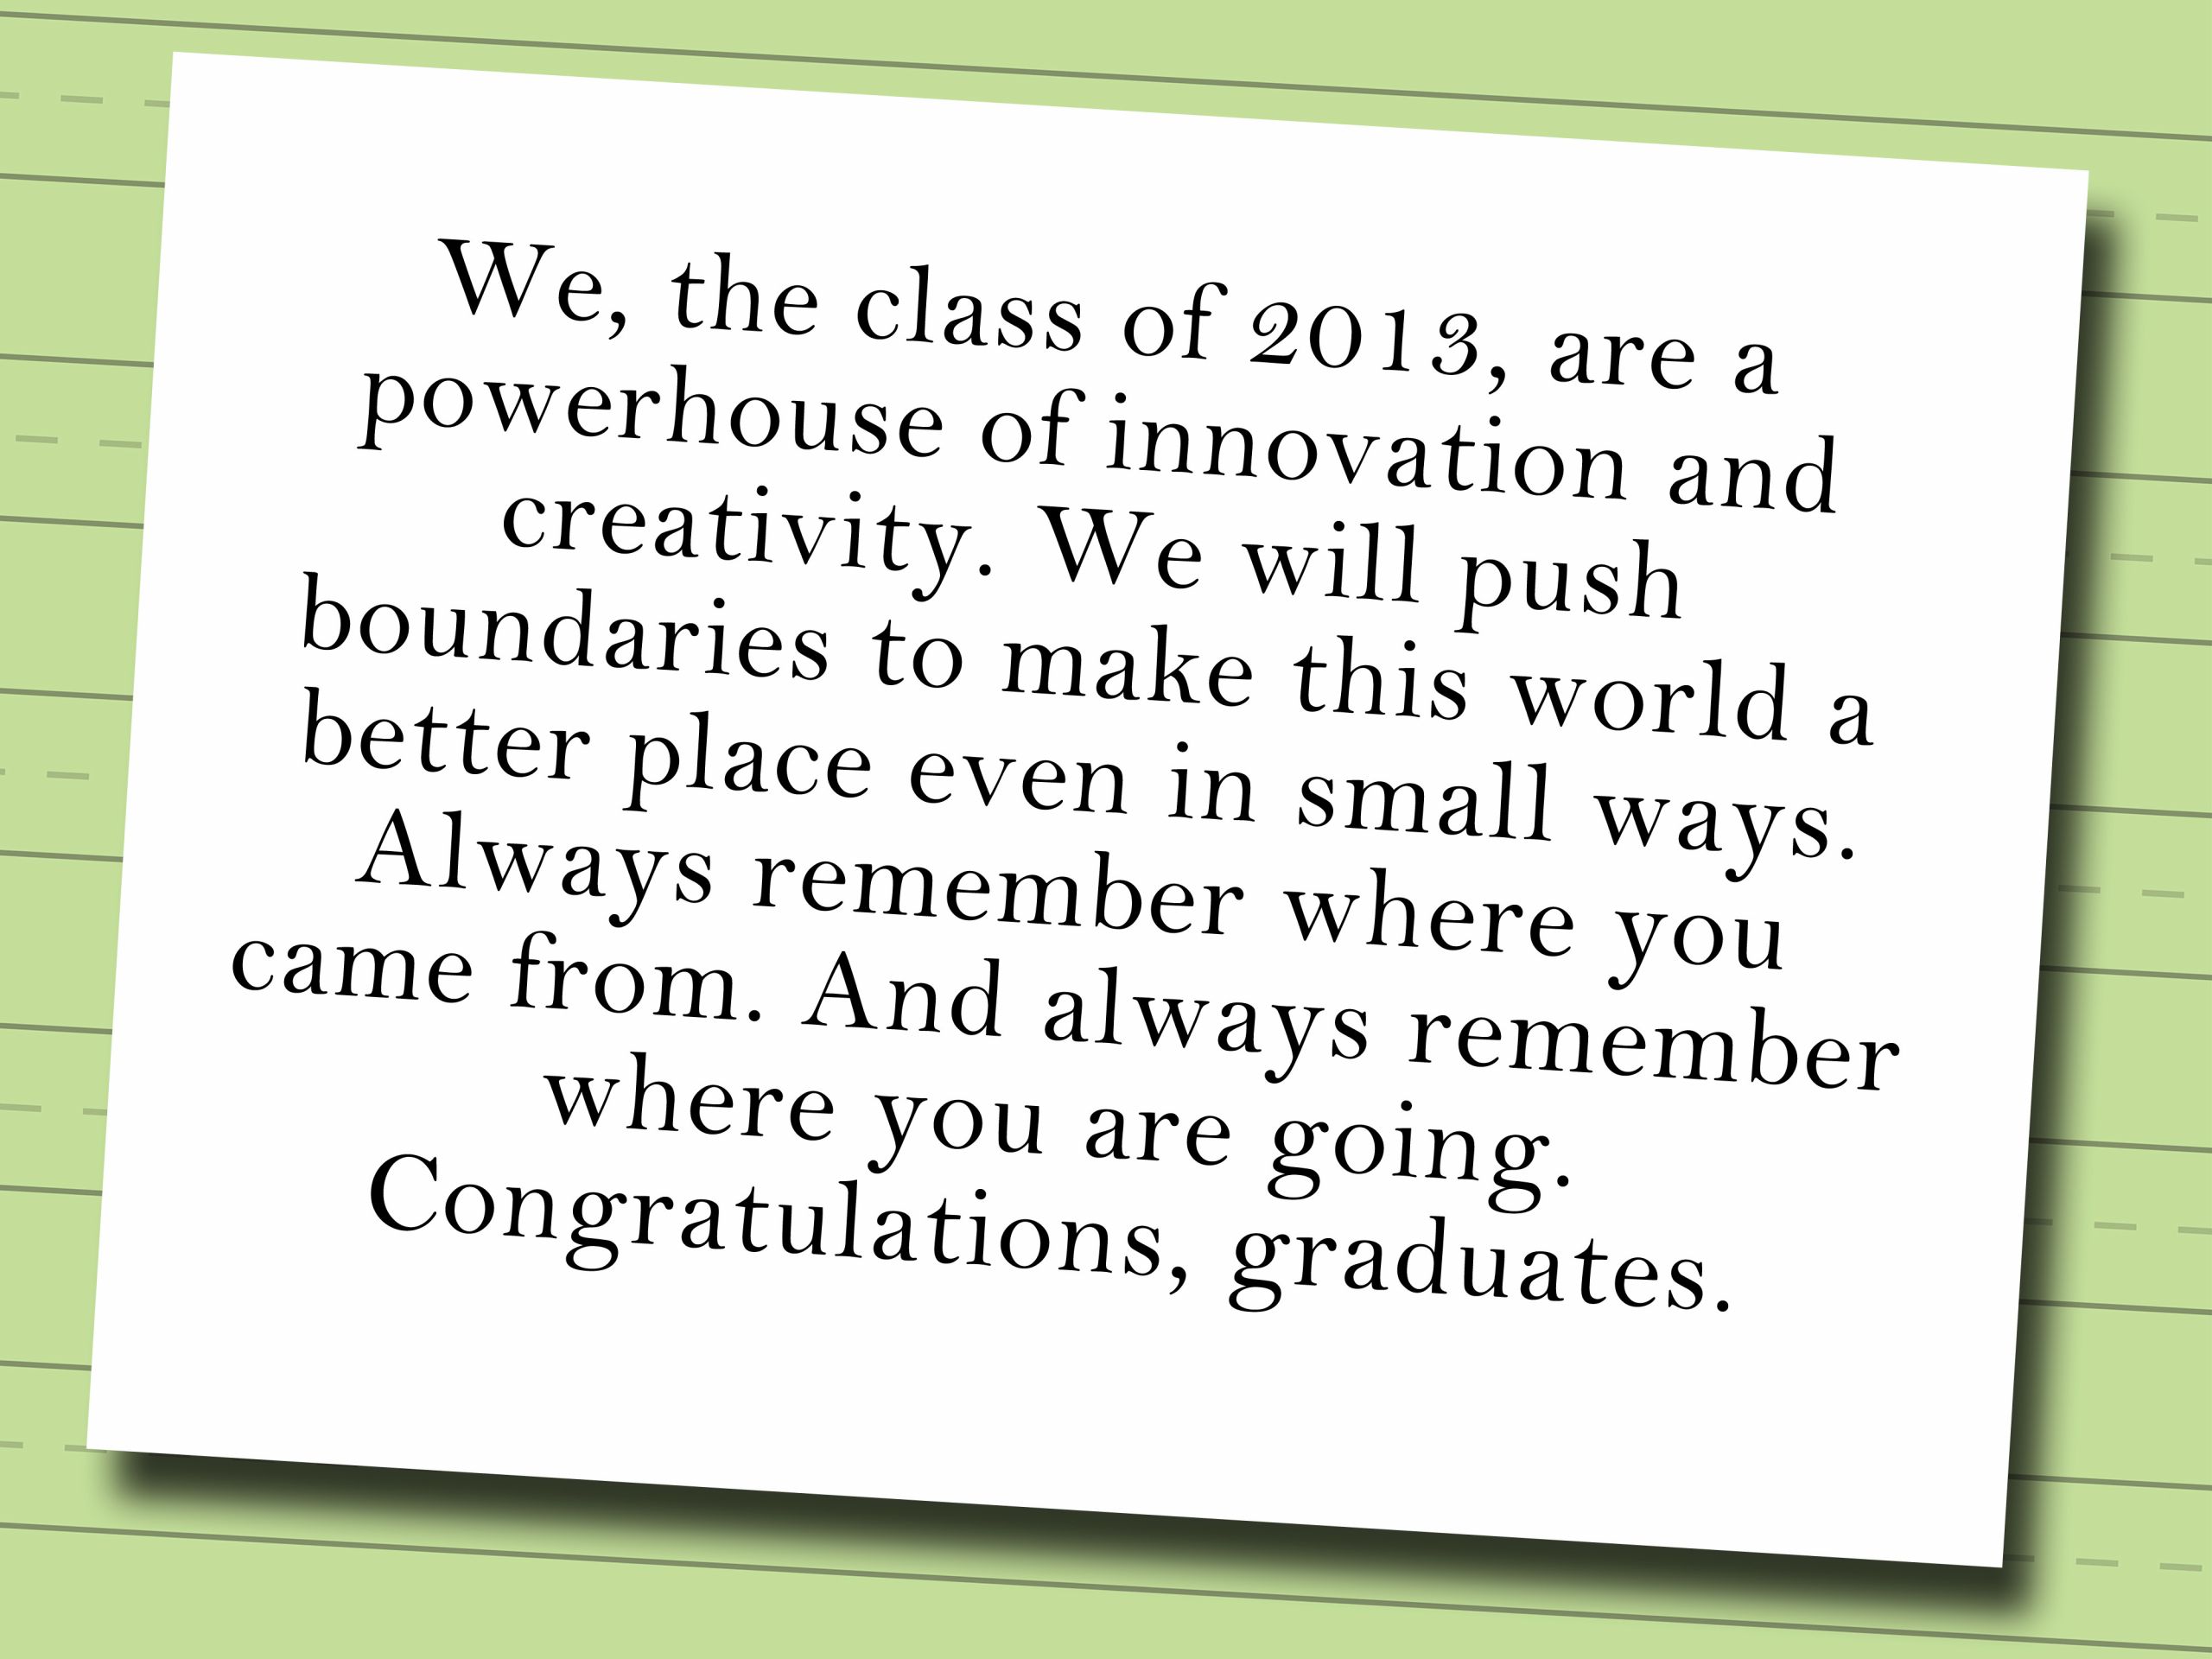 Quotes For Graduation Speeches
 How to Write a Valedictorian Speech wikiHow